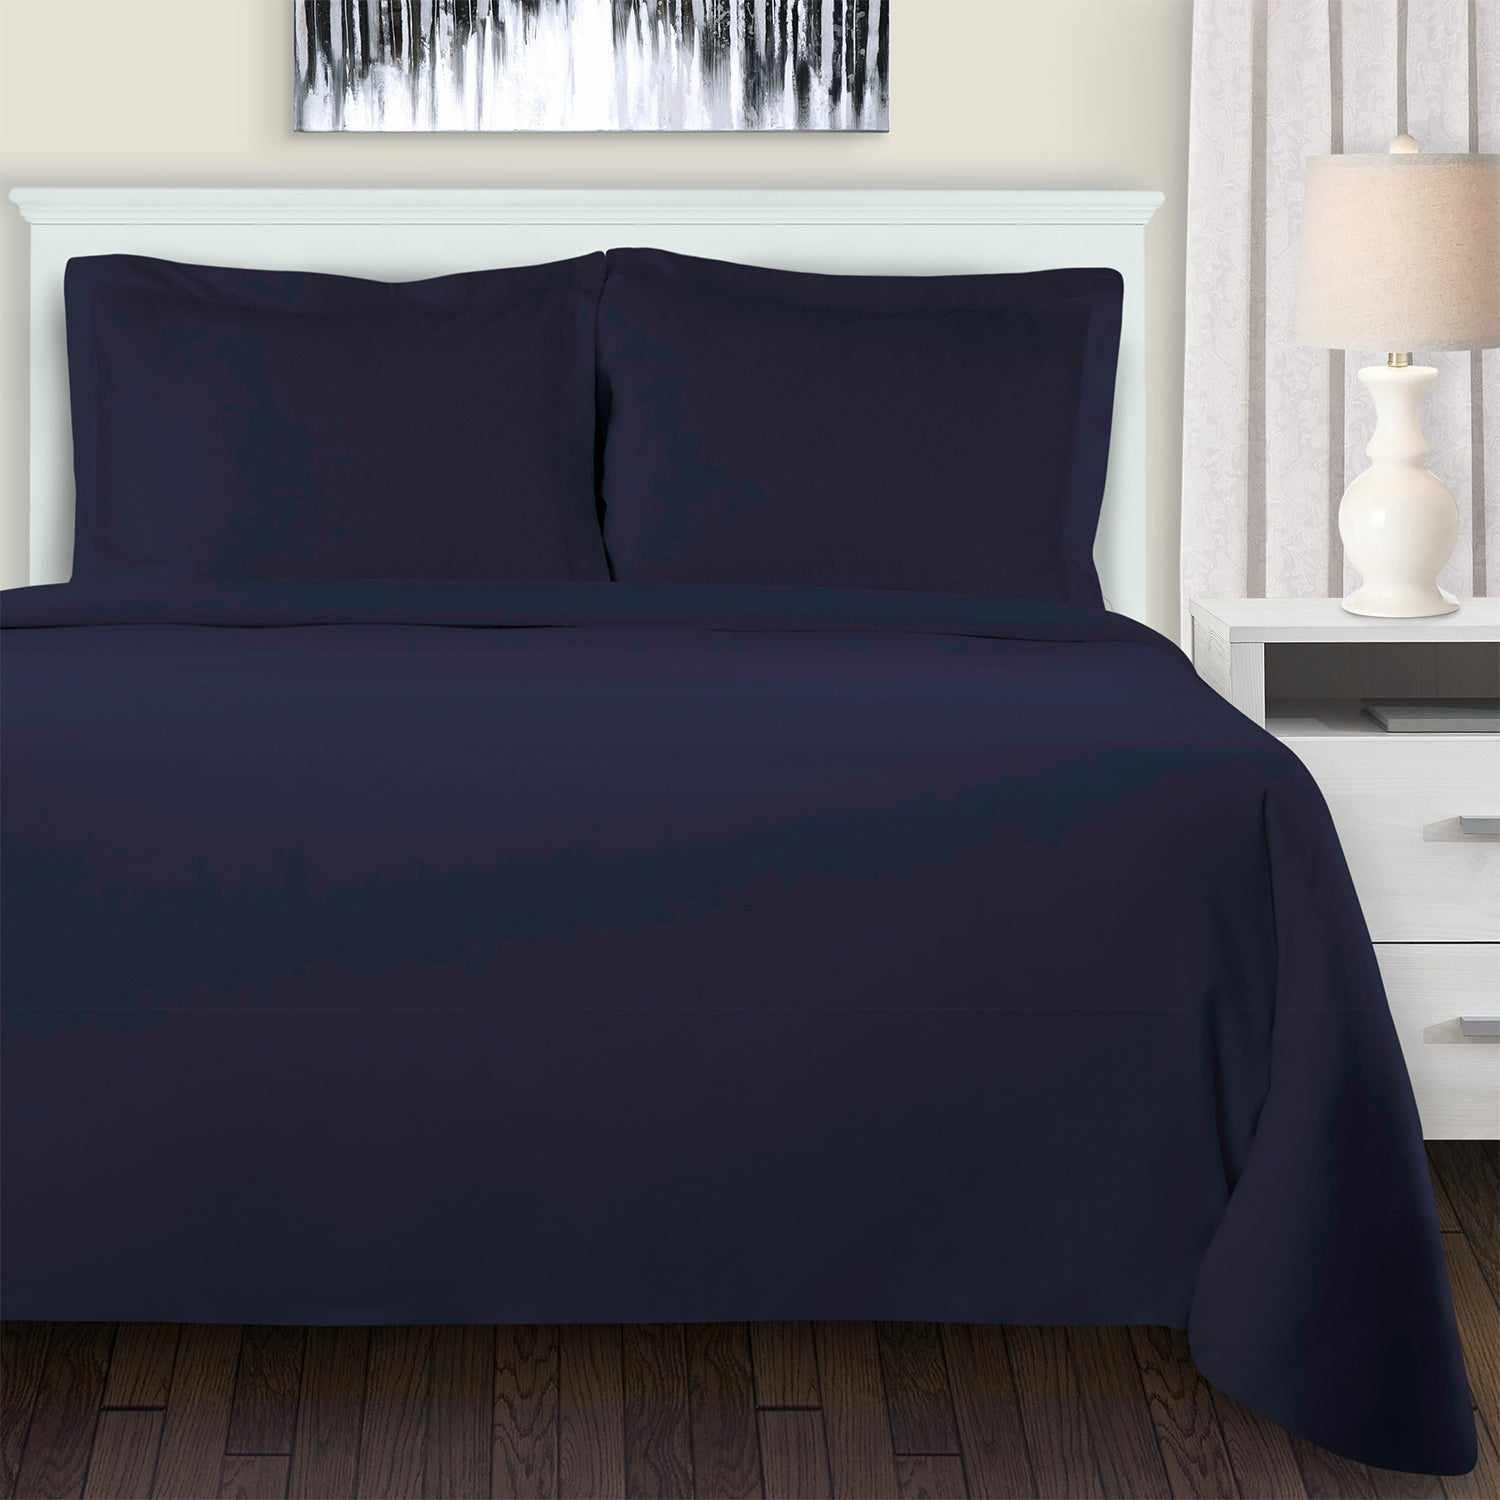 Superior Cotton Flannel Solid or Trellis Heavyweight and Breathable Duvet Cover Set with Button Closure - Navy Blue